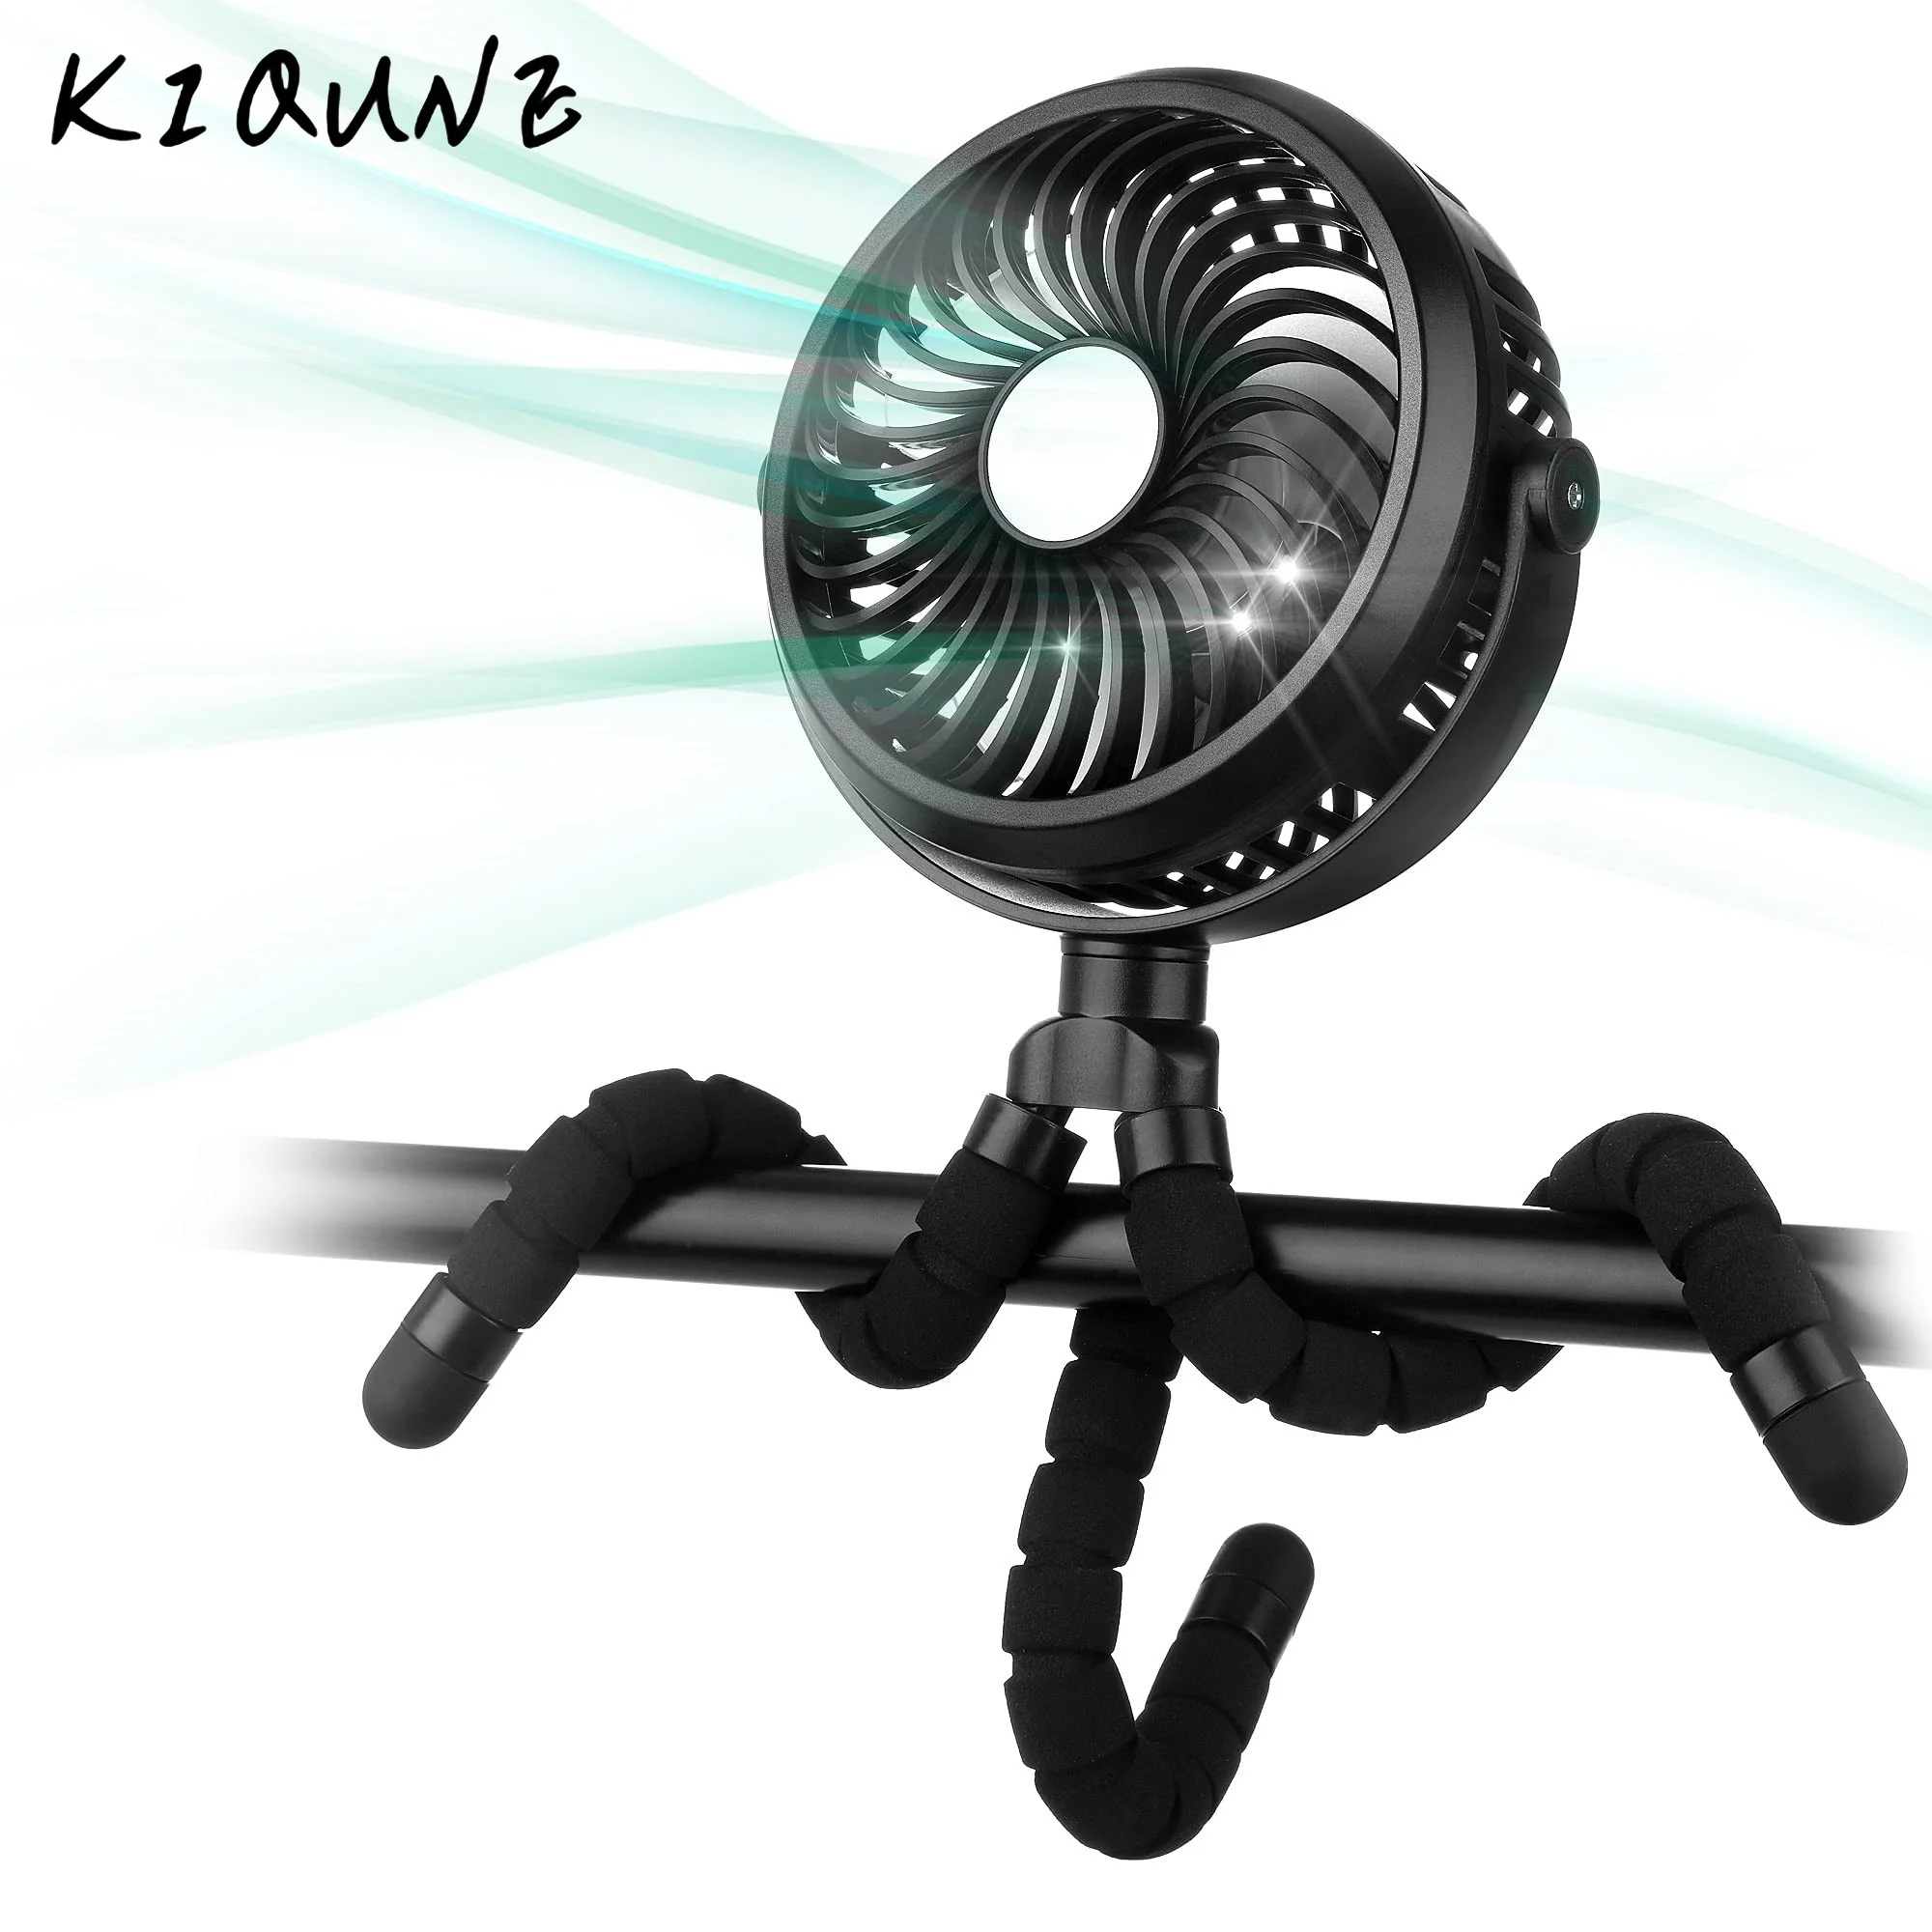 

Battery Operated Stroller Fan Flexible Tripod Clip On Fan with 3 Speeds and Rotatable Handheld Personal Fan for Car Seat Crib